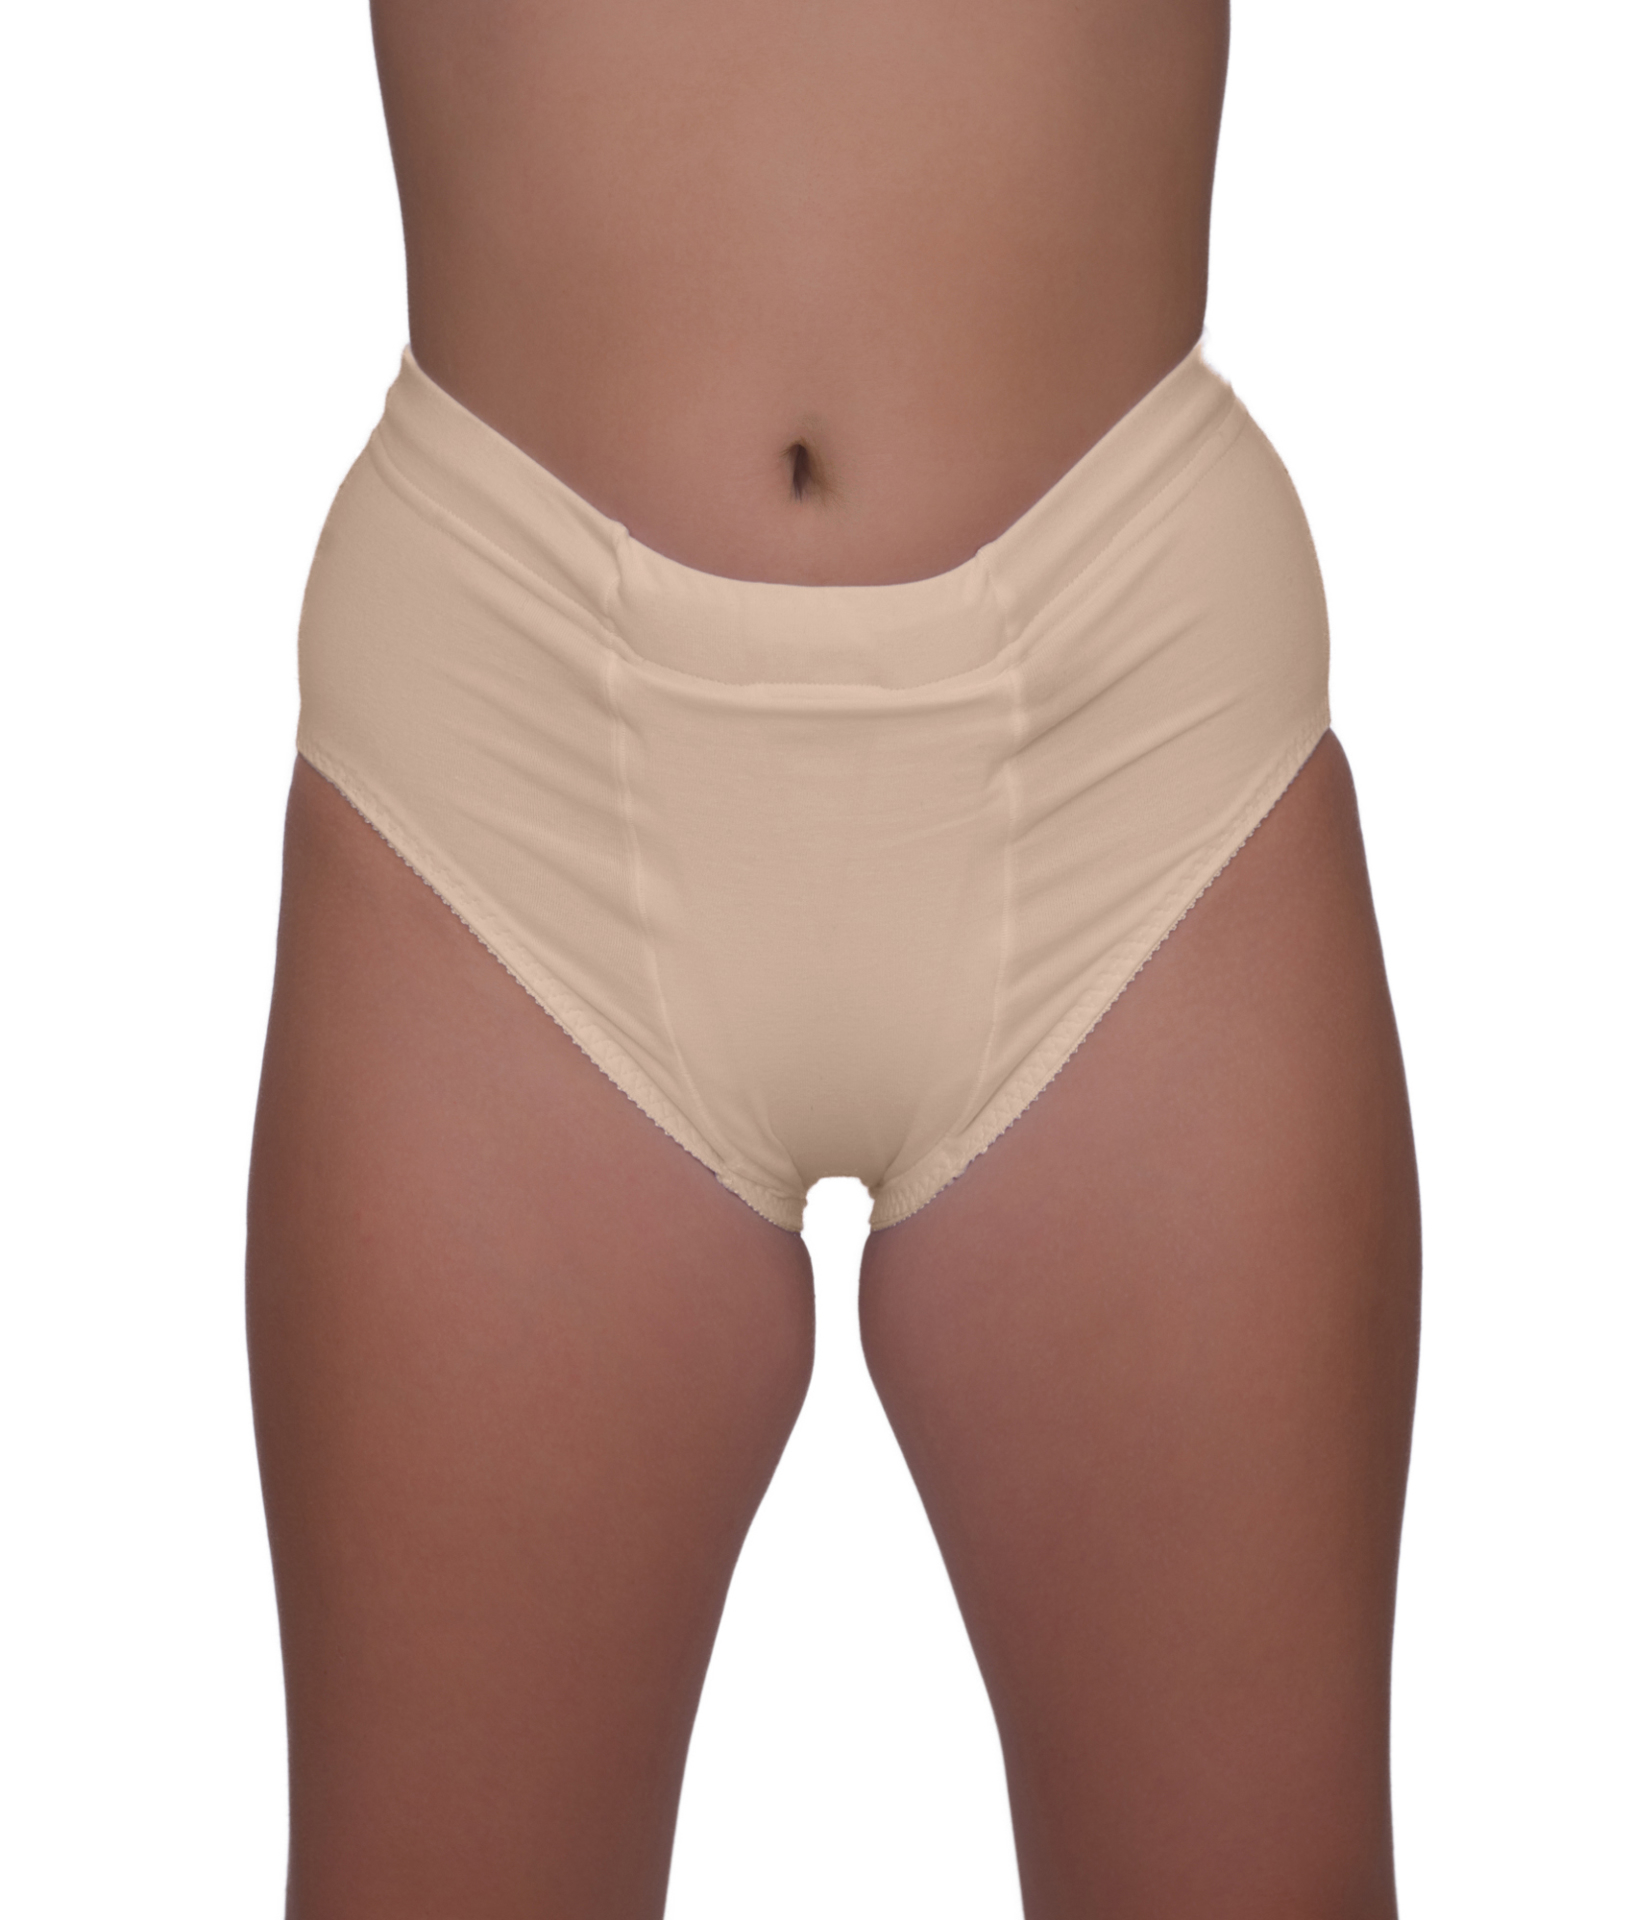 Branded Female UnderGarments - Sale Flat 35% OFF For Now! 7 Days